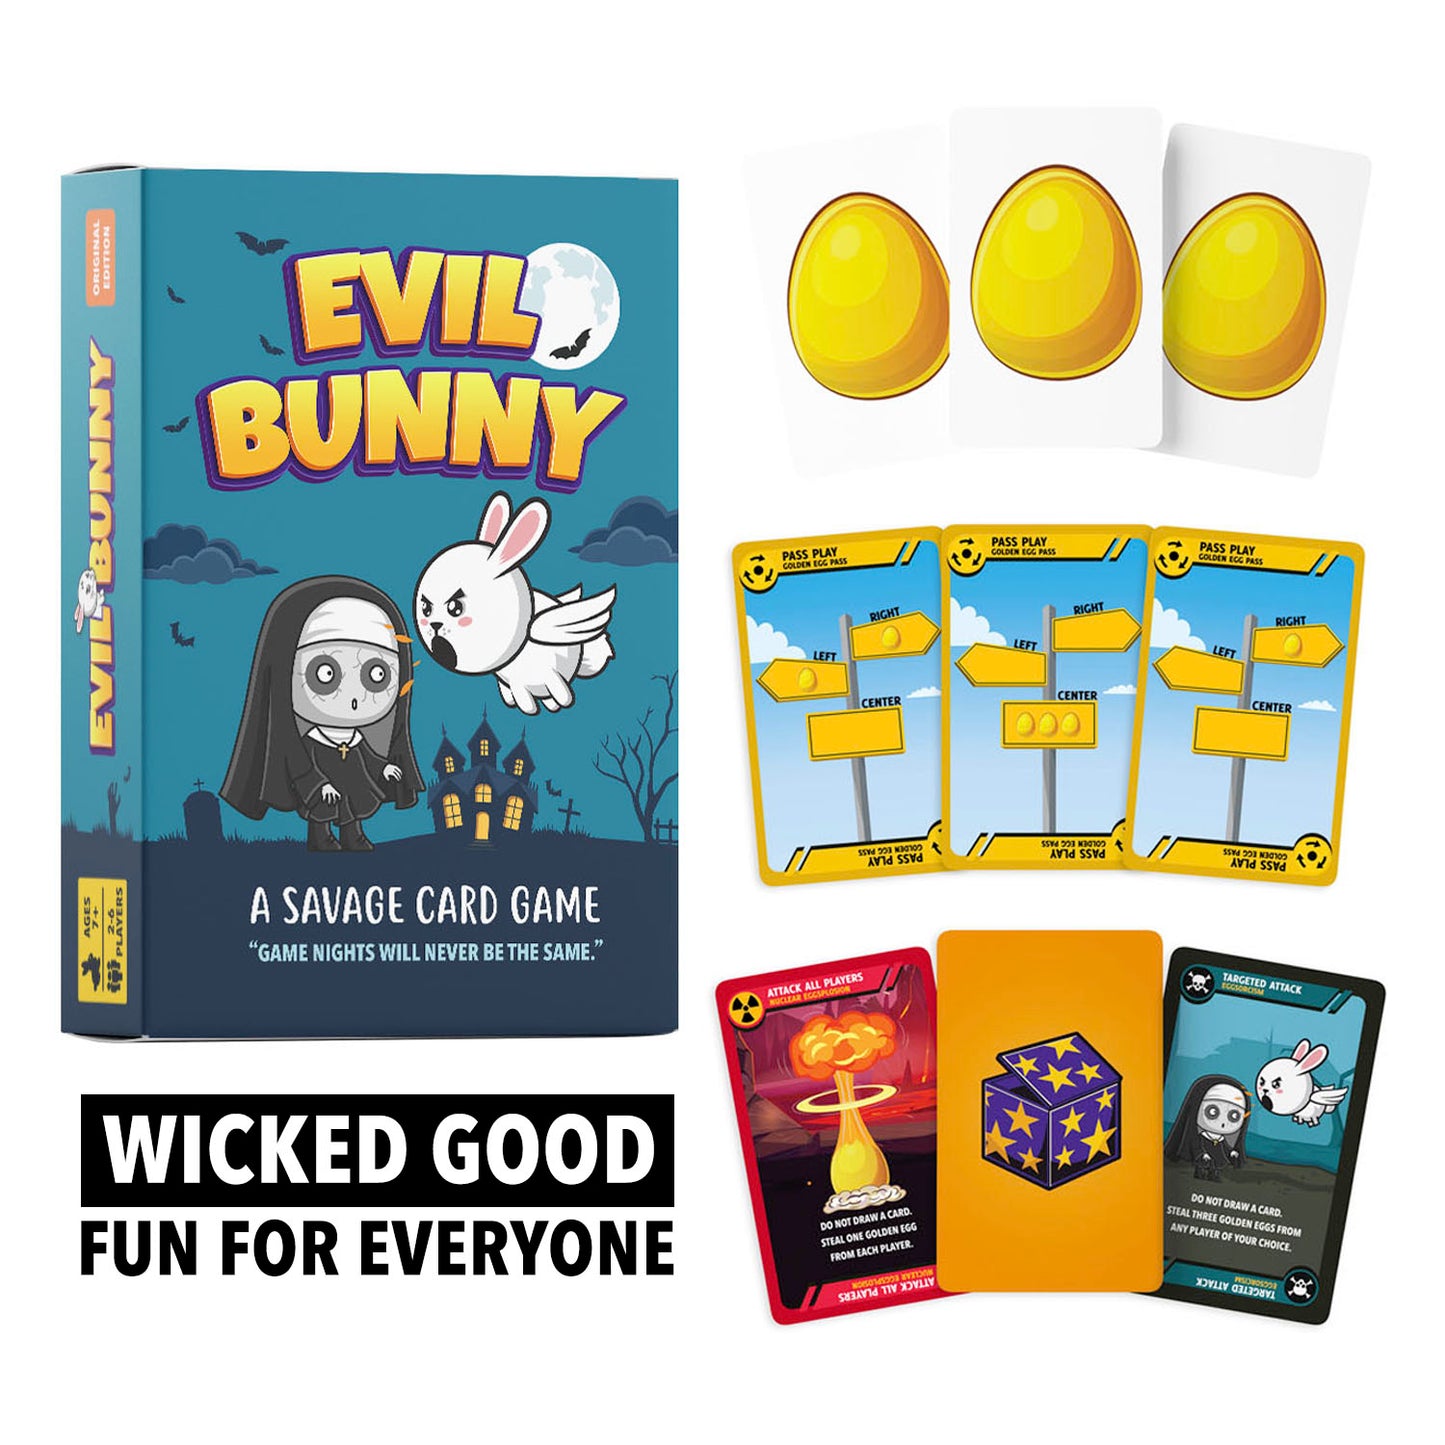 Evil Bunny – A Savage Card Game